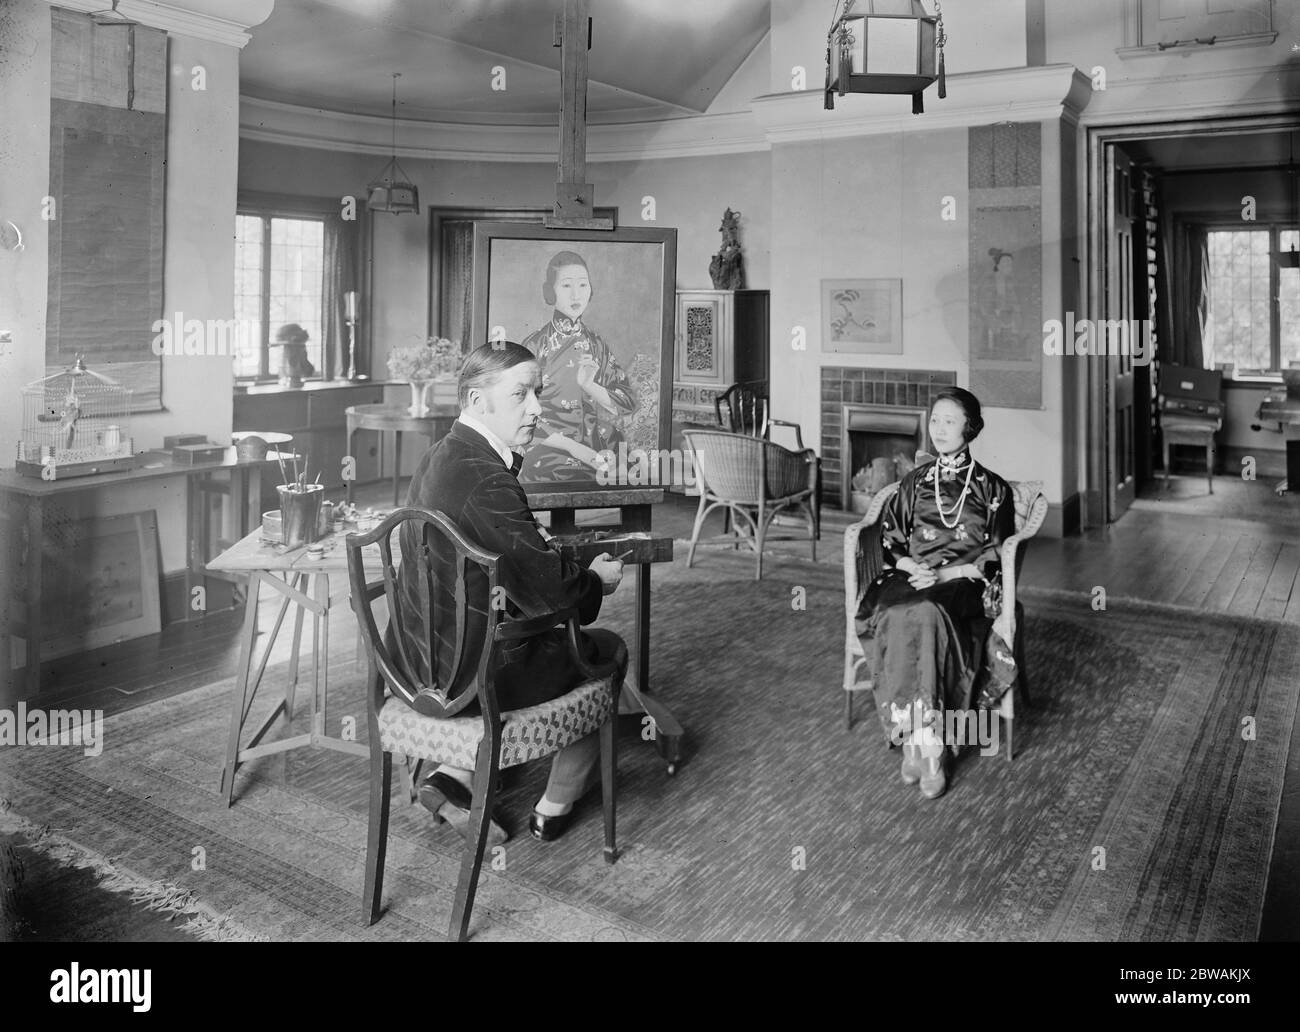 MME Wellington Koo sitting for her portrait to Mr Edmund Dulac at his studio , 117 Ladbroke Road 19 August 1921 Hui-lan Oei was the daughter of Chinese businessman Oei Tiong Ham. Her marriage to Chinese diplomat and politician Vi Kyuin Wellington Koo, was announced in November 1920 whilst Wellington Koo was Chinese Minister to the United States. In early 1921, Vi Kyuin Wellington Koo was appointed the Chinese Minister to Great Britain and they lived in London until June 1946, though they divorced shortly after the Second World War. Stock Photo